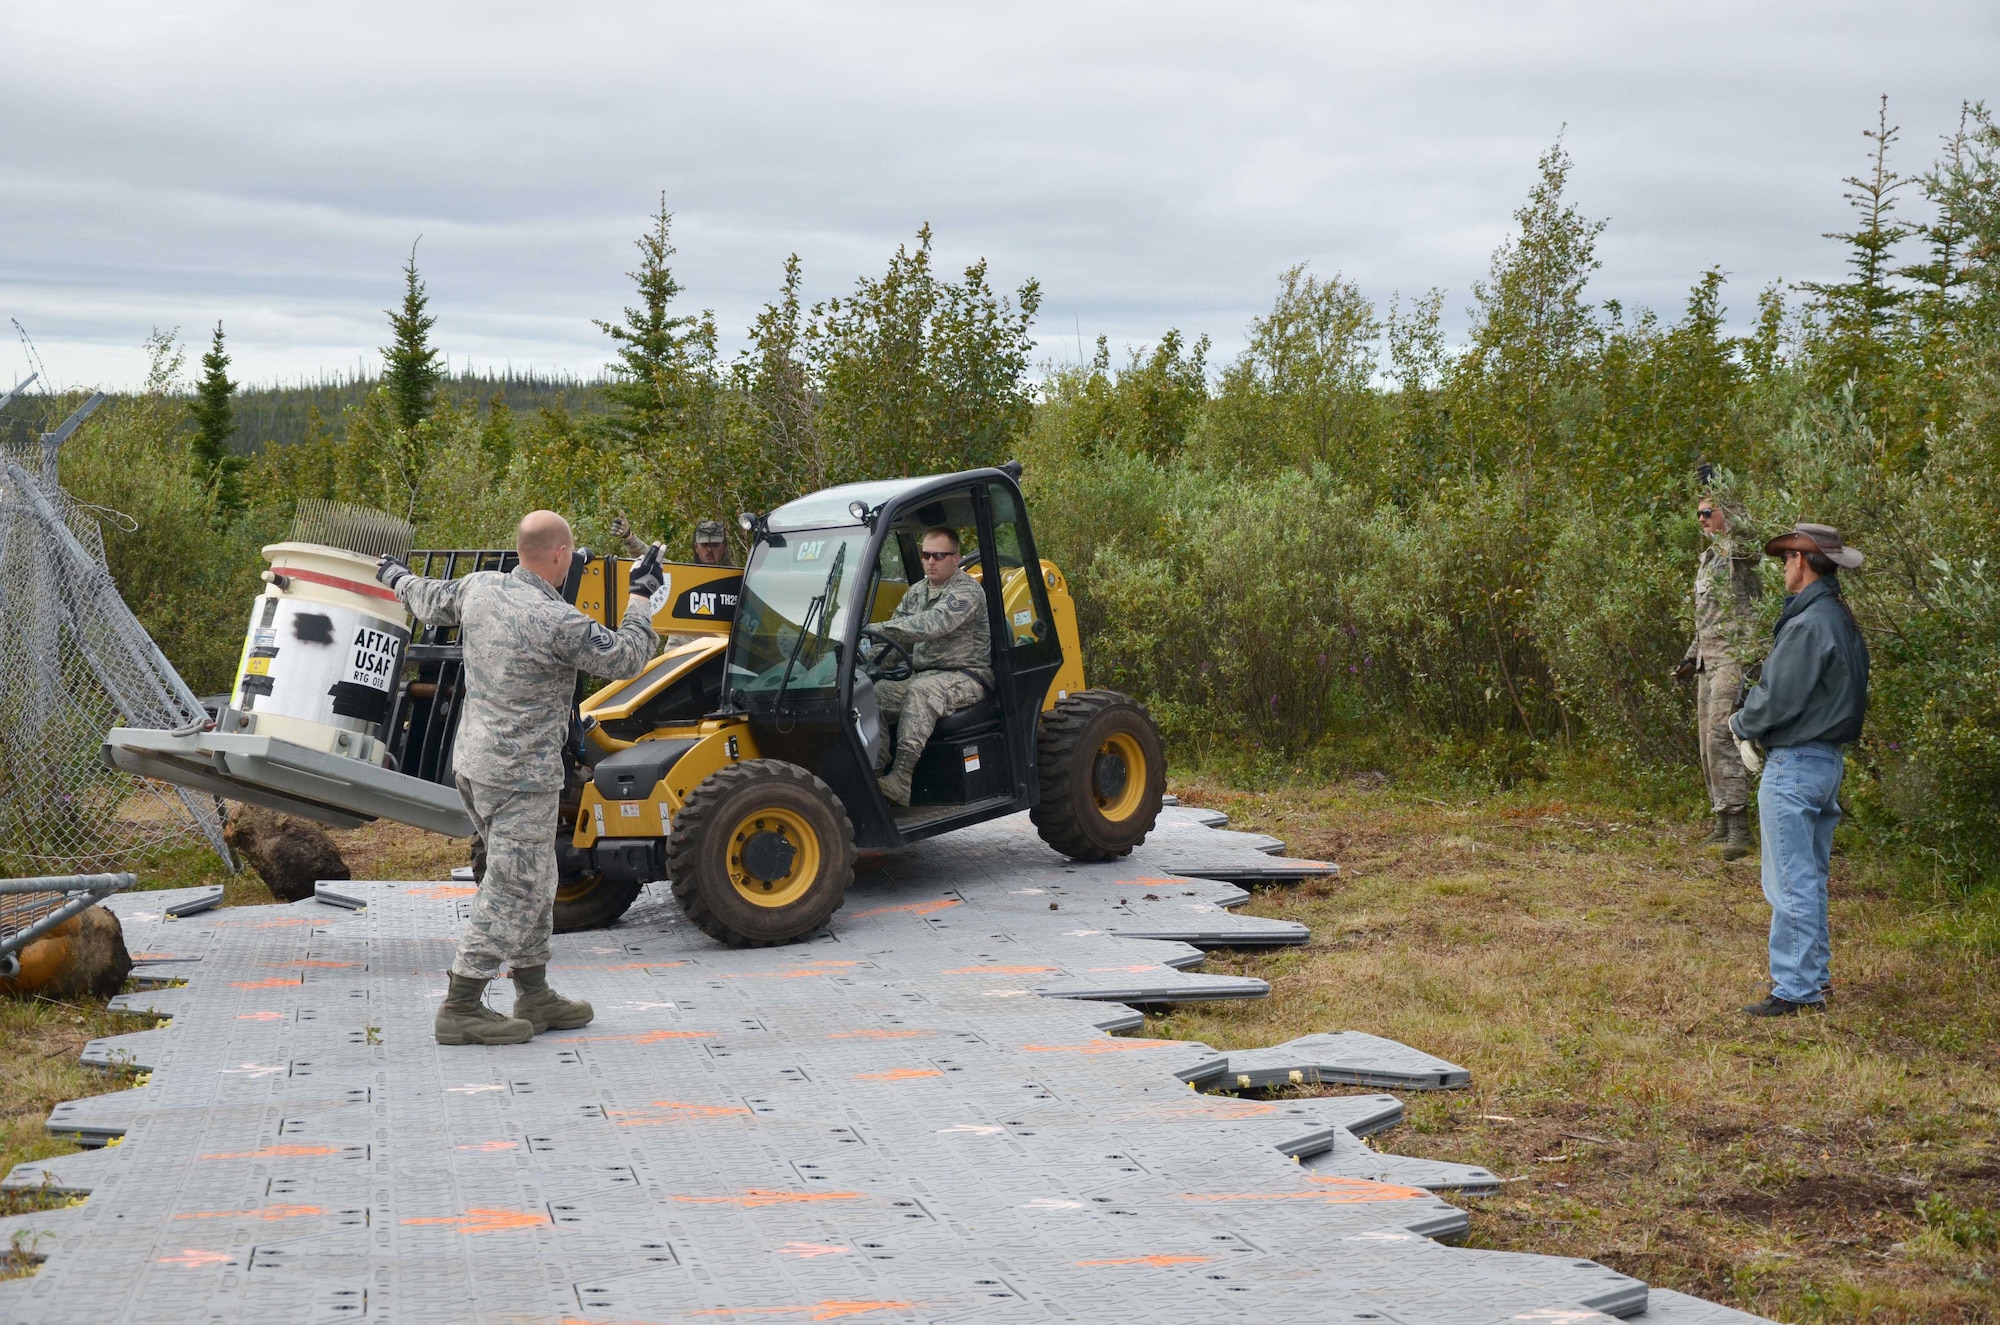 Master Sgt. Kevin Sanger (left) spots forklift driver Tech. Sgt. Larry Bouchard, both with the Air Force Technical Applications Center's Detachment 460 at Eielson AFB, Alaska, as Bouchard carefully transports a radioisotope thermoelectric generator from its trailer to an awaiting CH-47 Chinook July 17, 2015, for transport back to Eielson, while project manager Scott Lattimer (far right) observes.  The RTGs, which contain radiologic material, were originally used because of their high reliability and low maintenance requirements to determine if regional seismic activity was caused by nuclear explosions or naturally-occurring events such as earthquakes, mining explosions, volcanic activity, etc.  AFTAC’s primary mission is to verify compliance with nuclear test ban treaties.  (U.S. Air Force photo by Susan A. Romano)